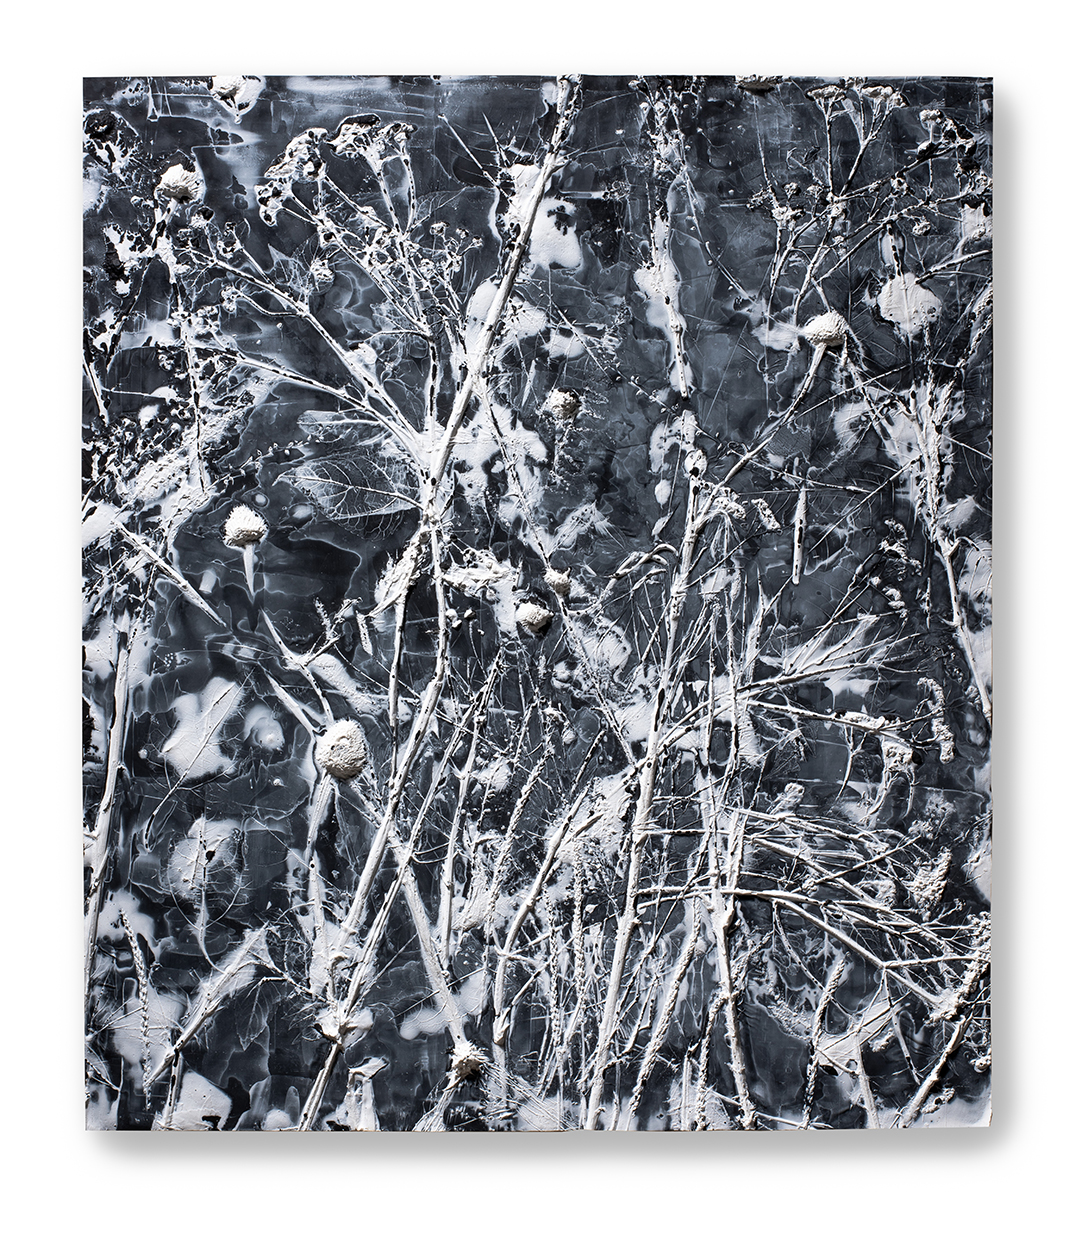 An painting in black and white tones composed of imagery of leaves, stems of bushes, and snowy white spots that is arranged among brush strokes and streaks of paint in a manner that makes it look like a large abstract drip piece.